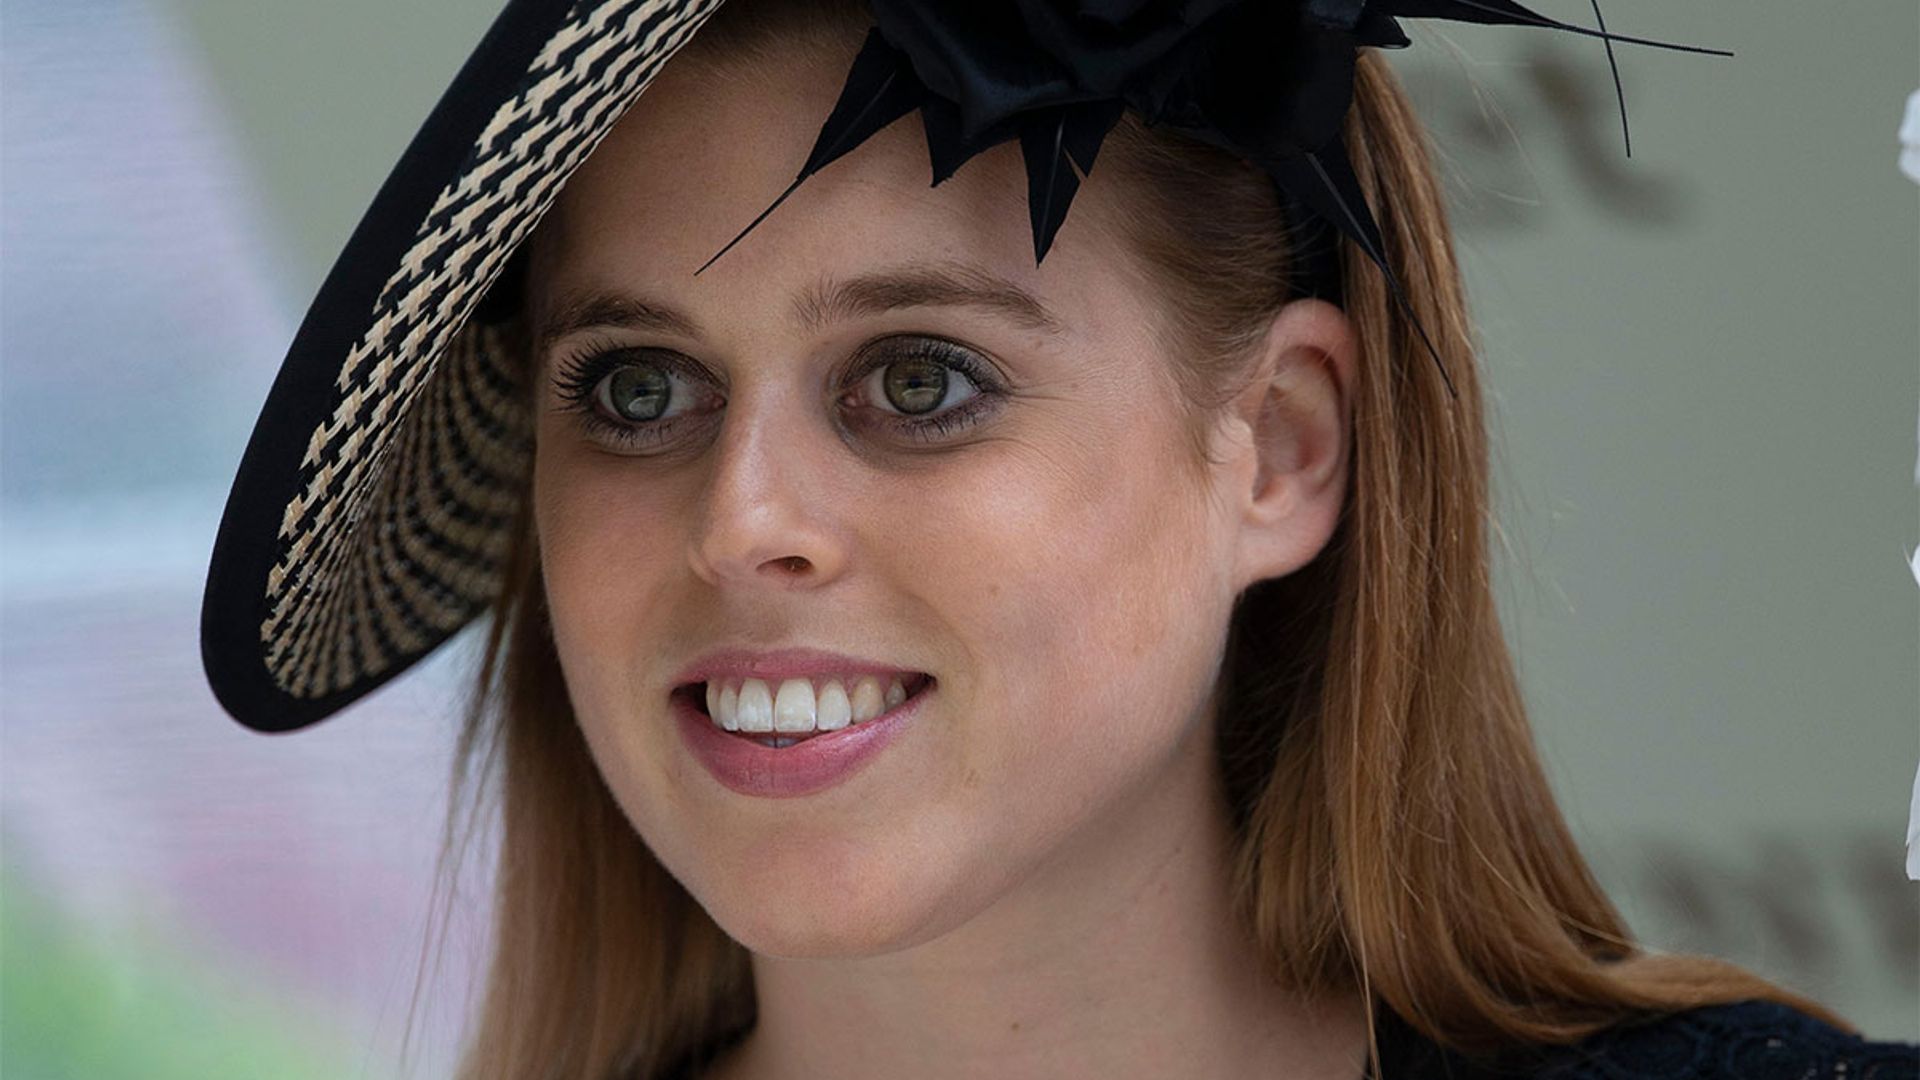 Princess Beatrice's tweed cardigan is the springtime item we all want